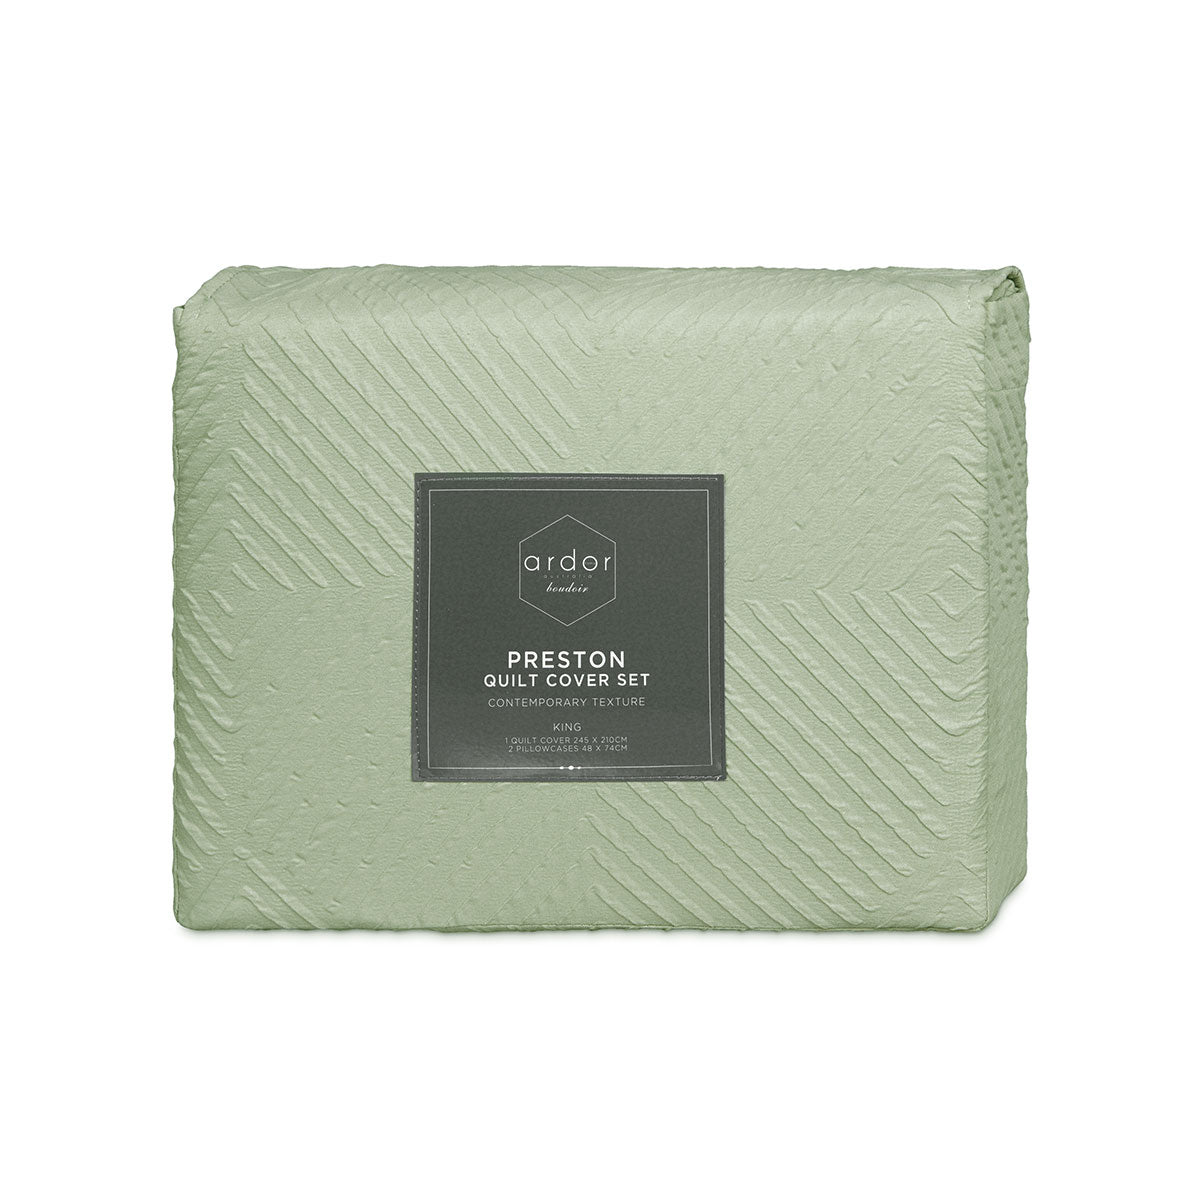 QUEEN Embossed Quilt Cover Set - Palm Green